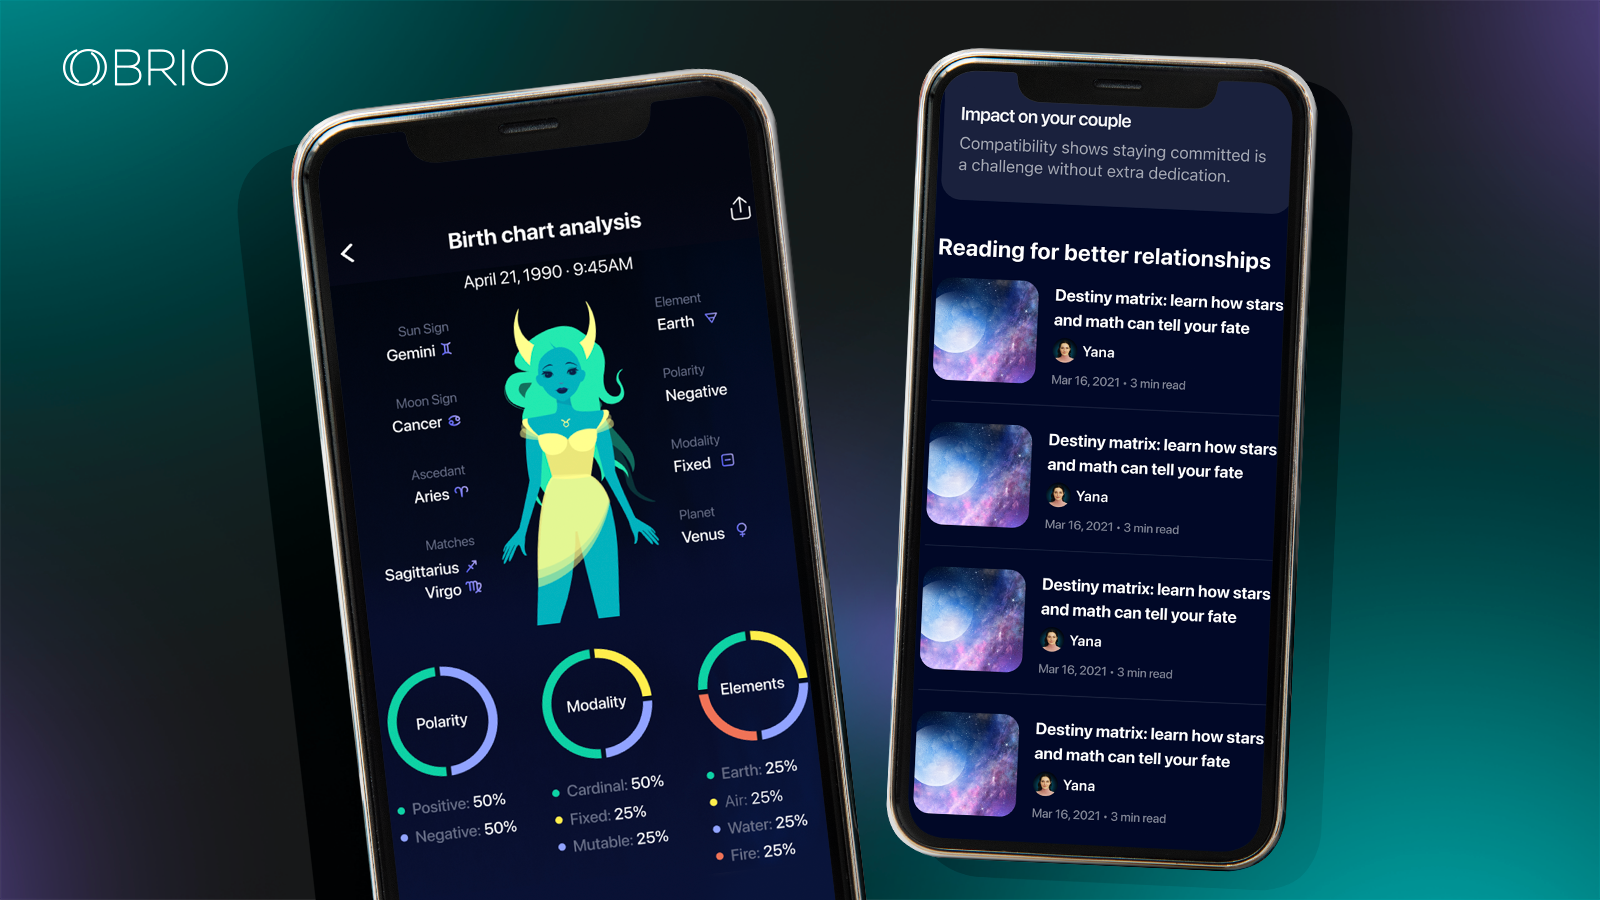 Screen shots of two different features of the Nebula app